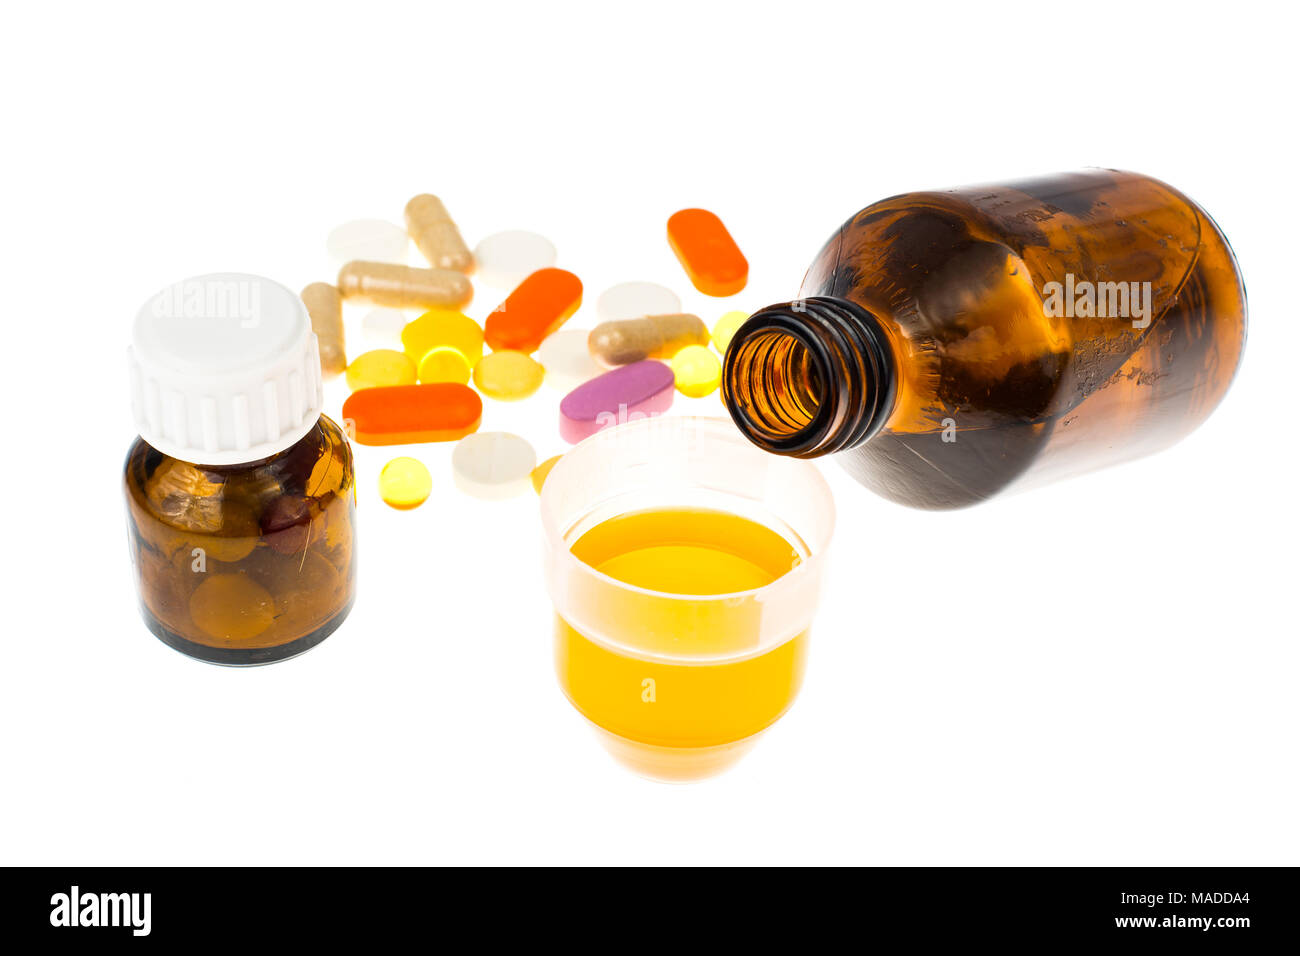 Tablets and syrups forms of medication. Studio Photo Stock Photo